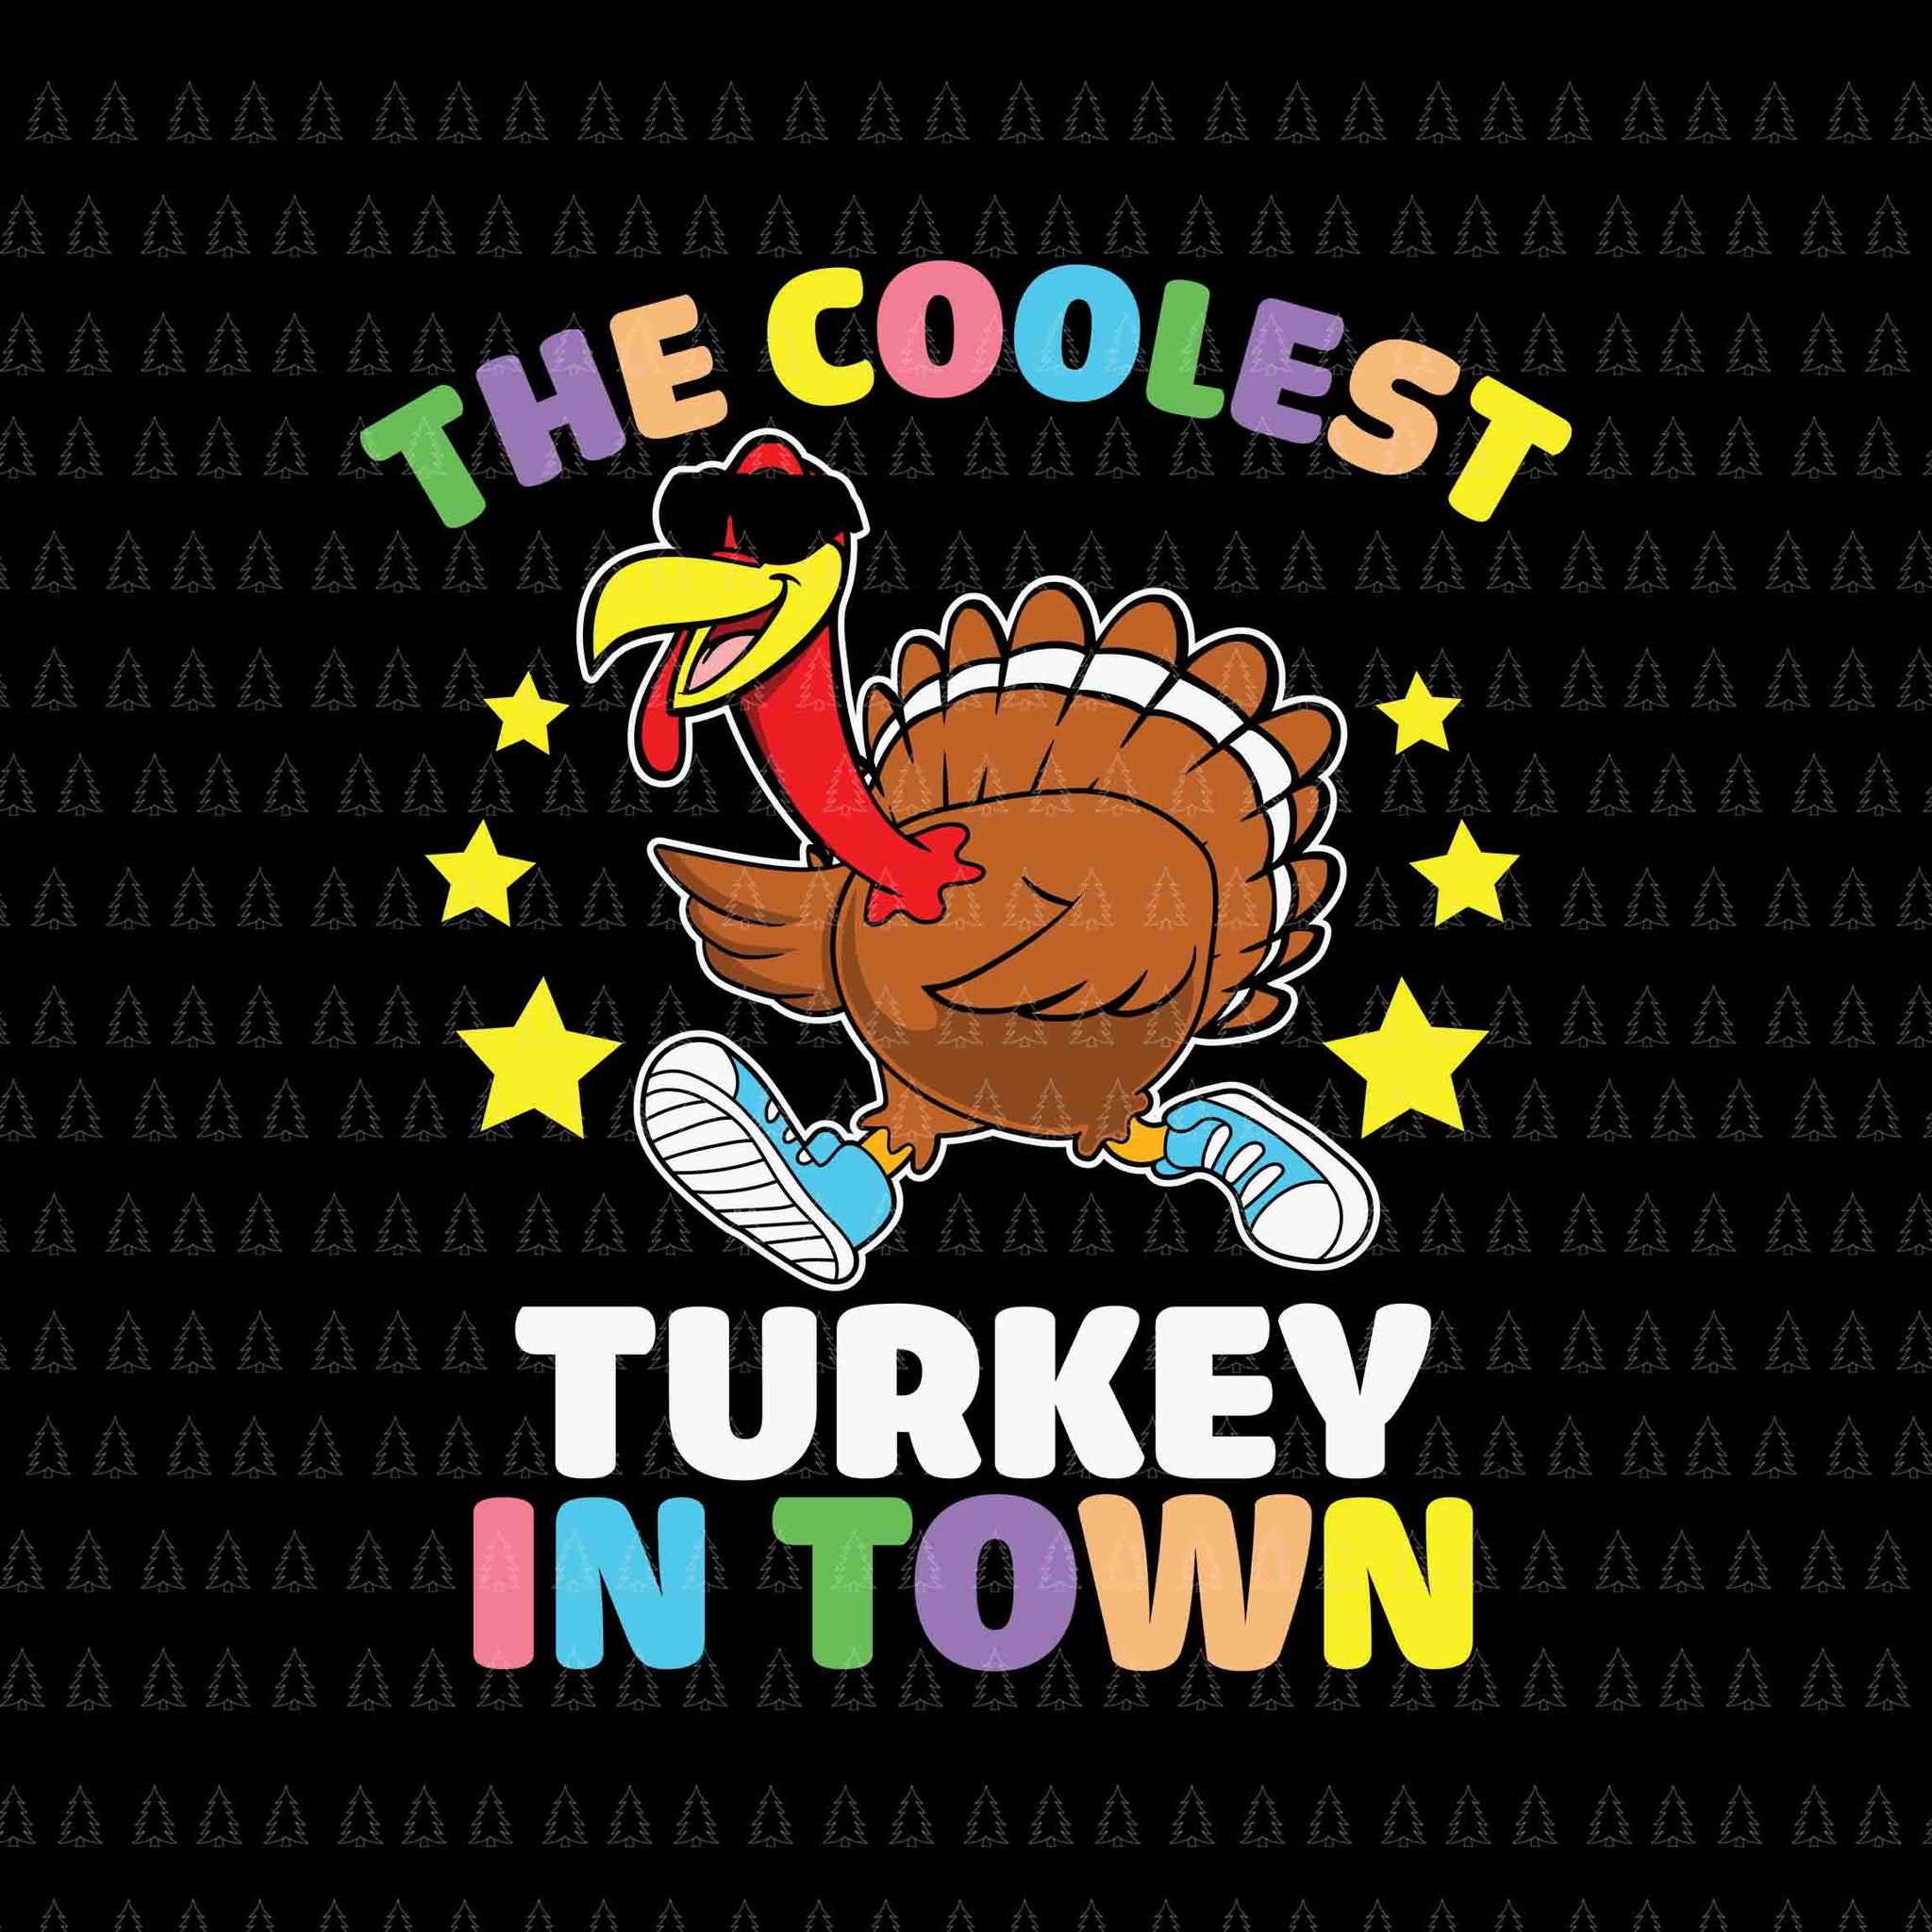 The Coolest Turkey In Town Svg, Happy Thanksgiving Svg, Turkey Svg, Turkey Day Svg, Thanksgiving Svg, Thanksgiving Turkey Svg, Thanksgiving 2021 Svg